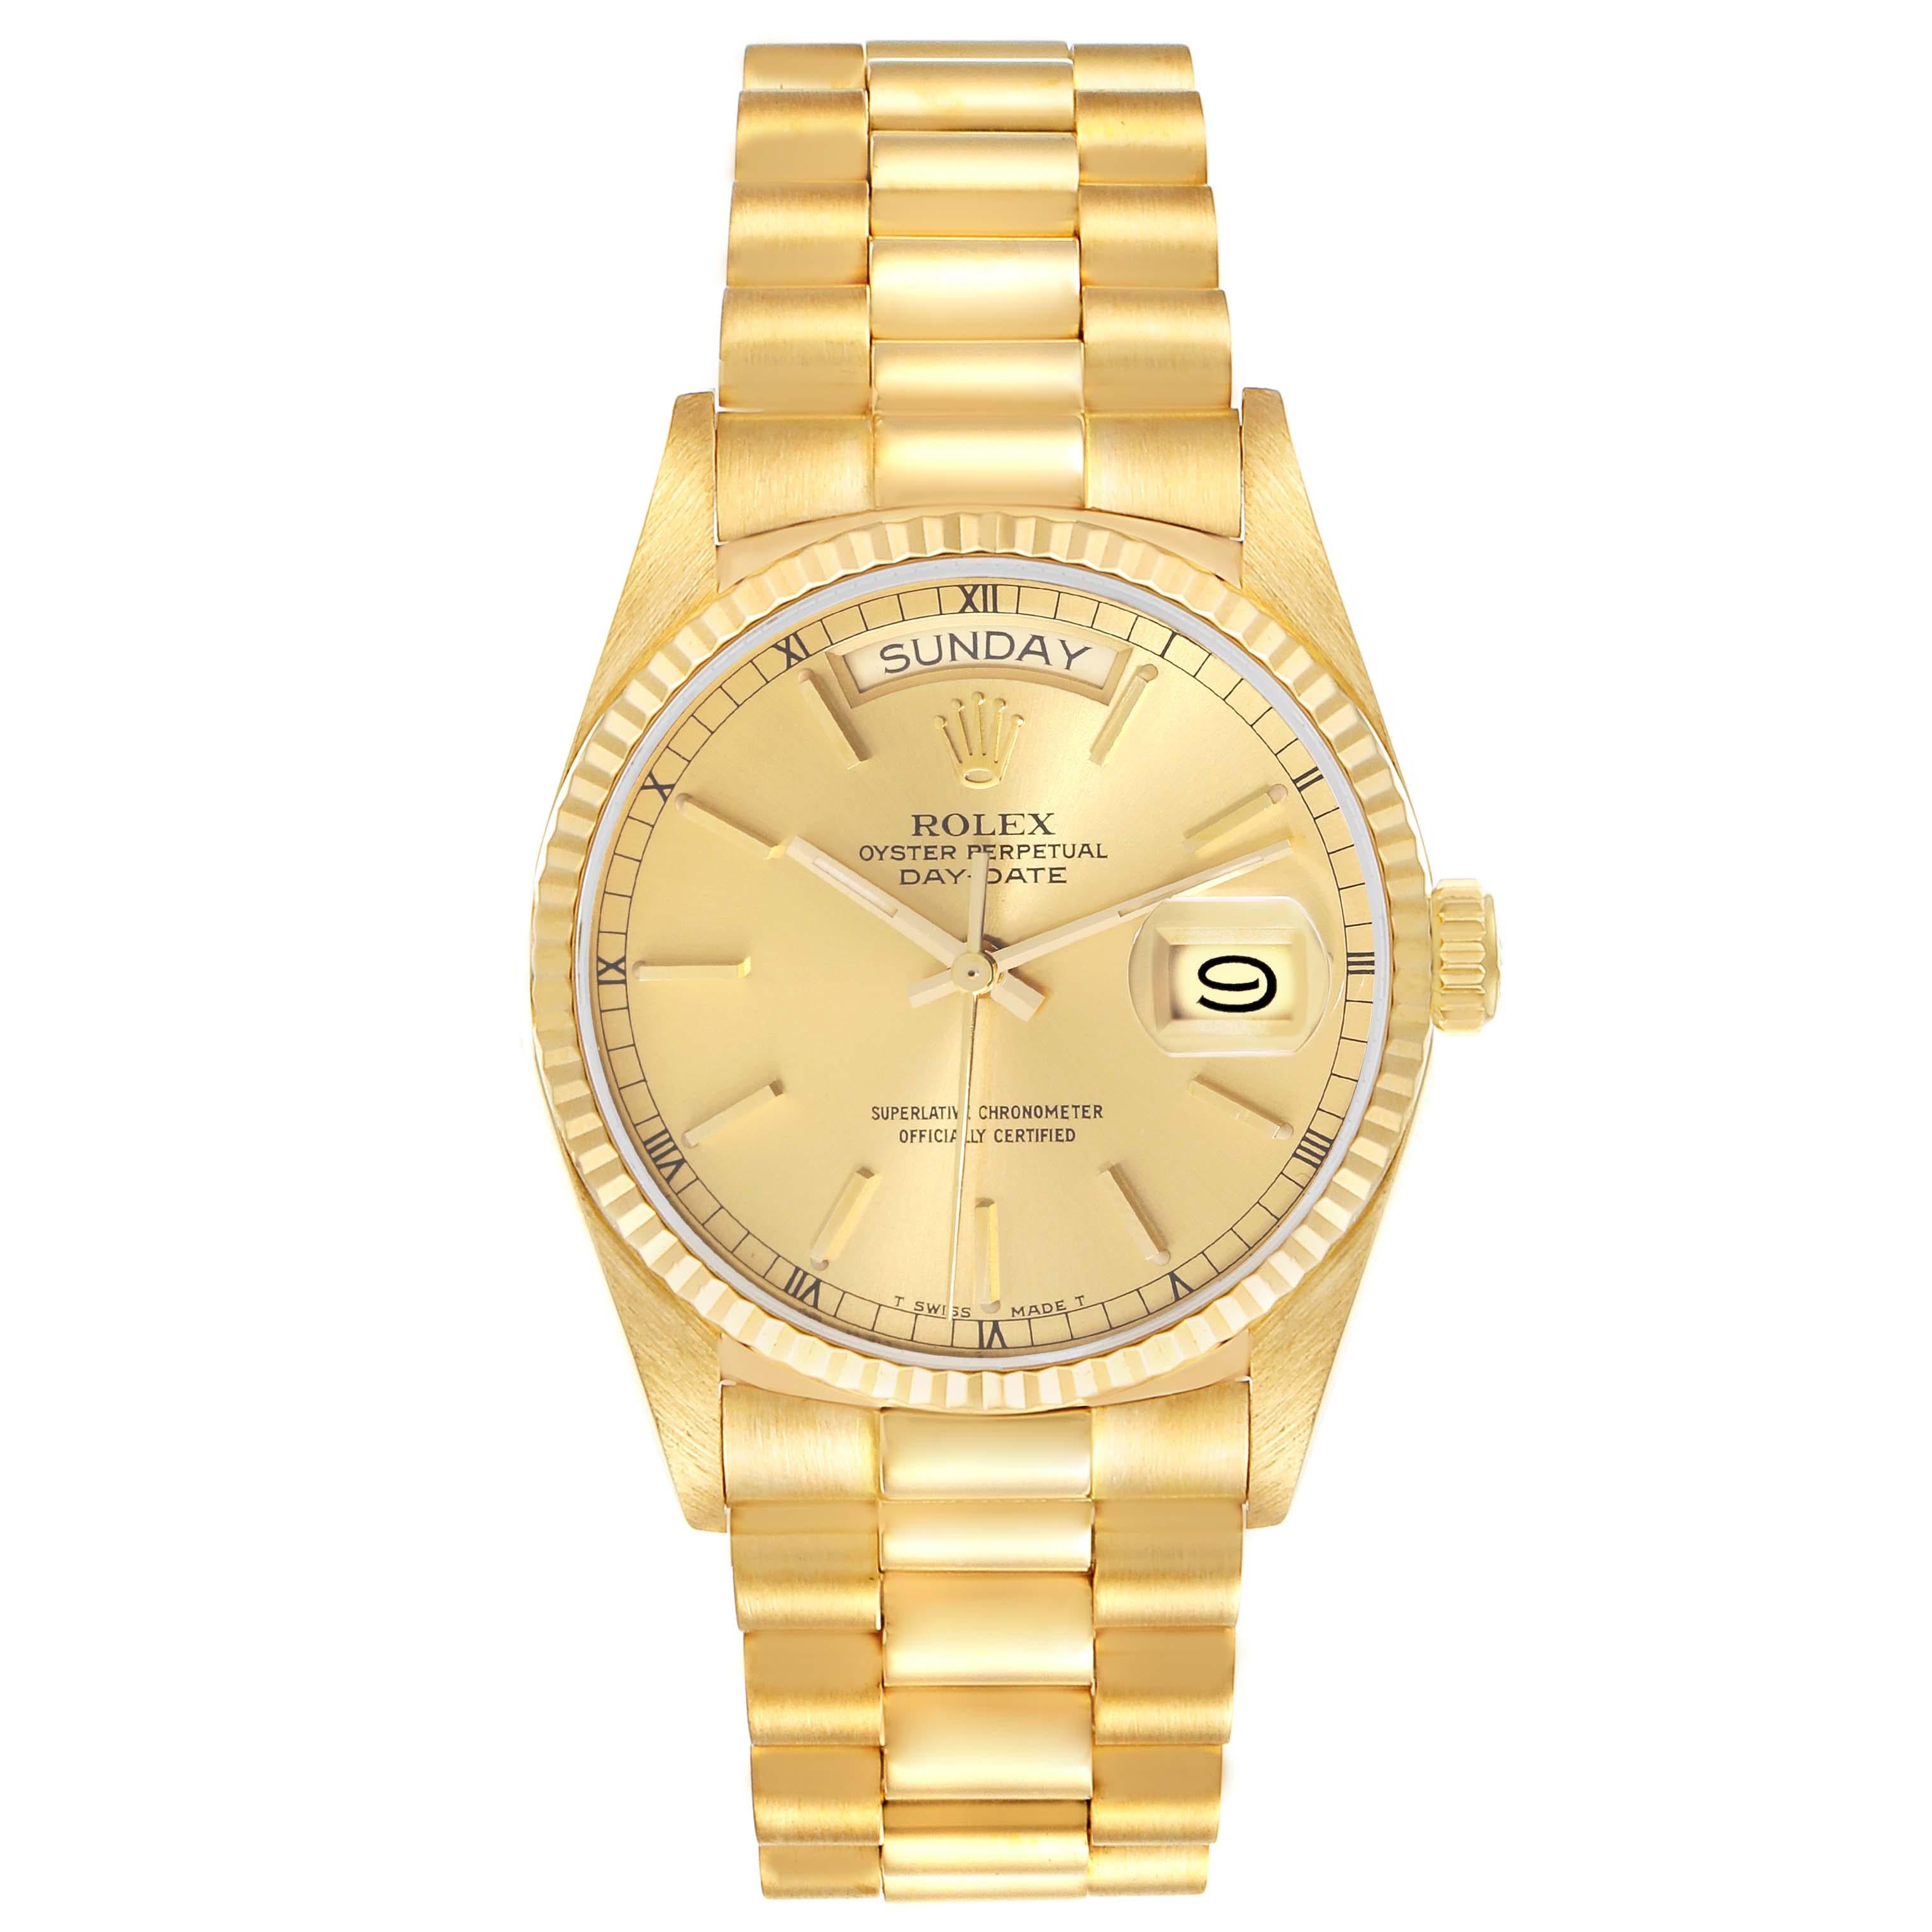 Rolex President Day-Date Yellow Gold Champagne Dial Mens Watch 18038 Box Papers. Officially certified chronometer automatic self-winding movement. 18k yellow gold oyster case 36.0 mm in diameter.  Rolex logo on a crown. 18k yellow gold fluted bezel.